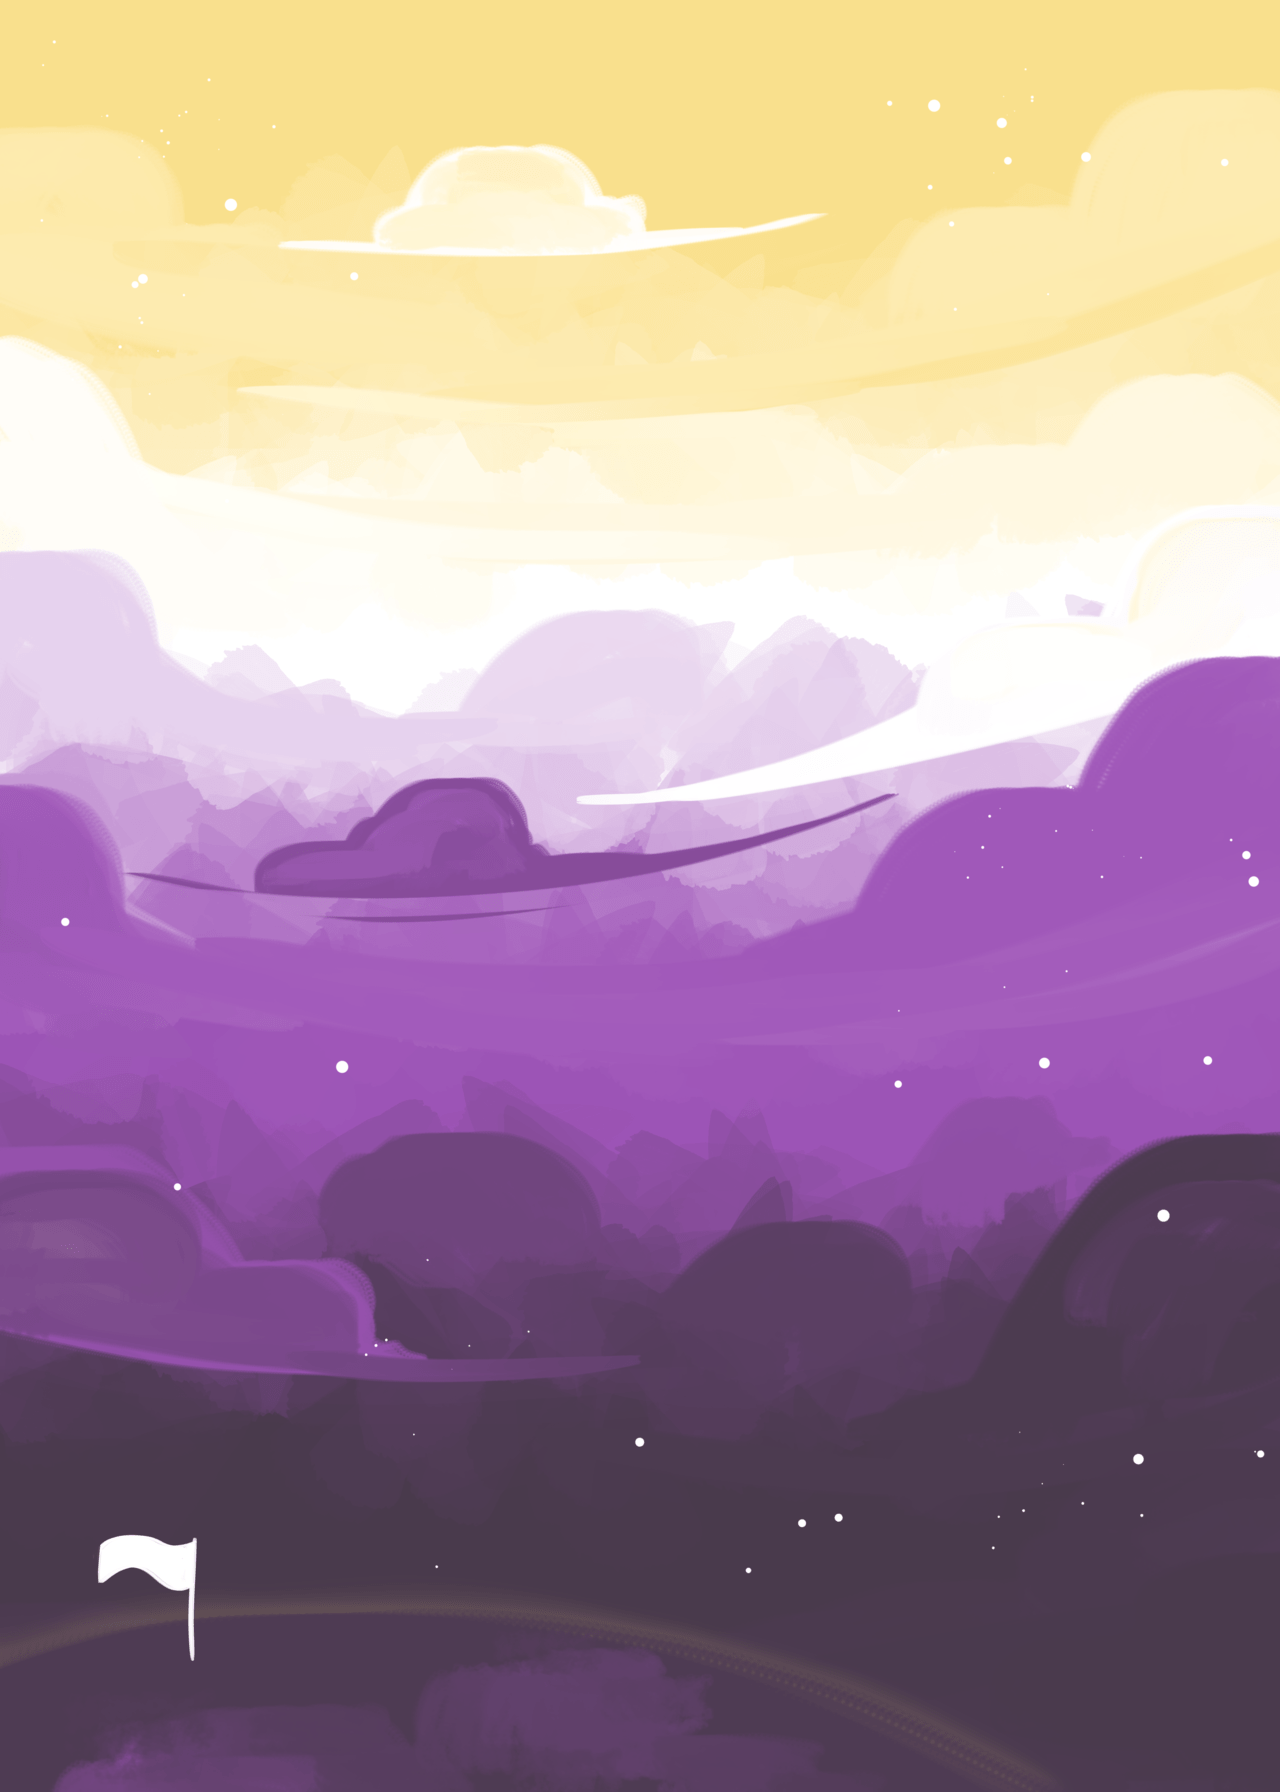 A purple and yellow landscape with a white flag in the foreground - Non binary